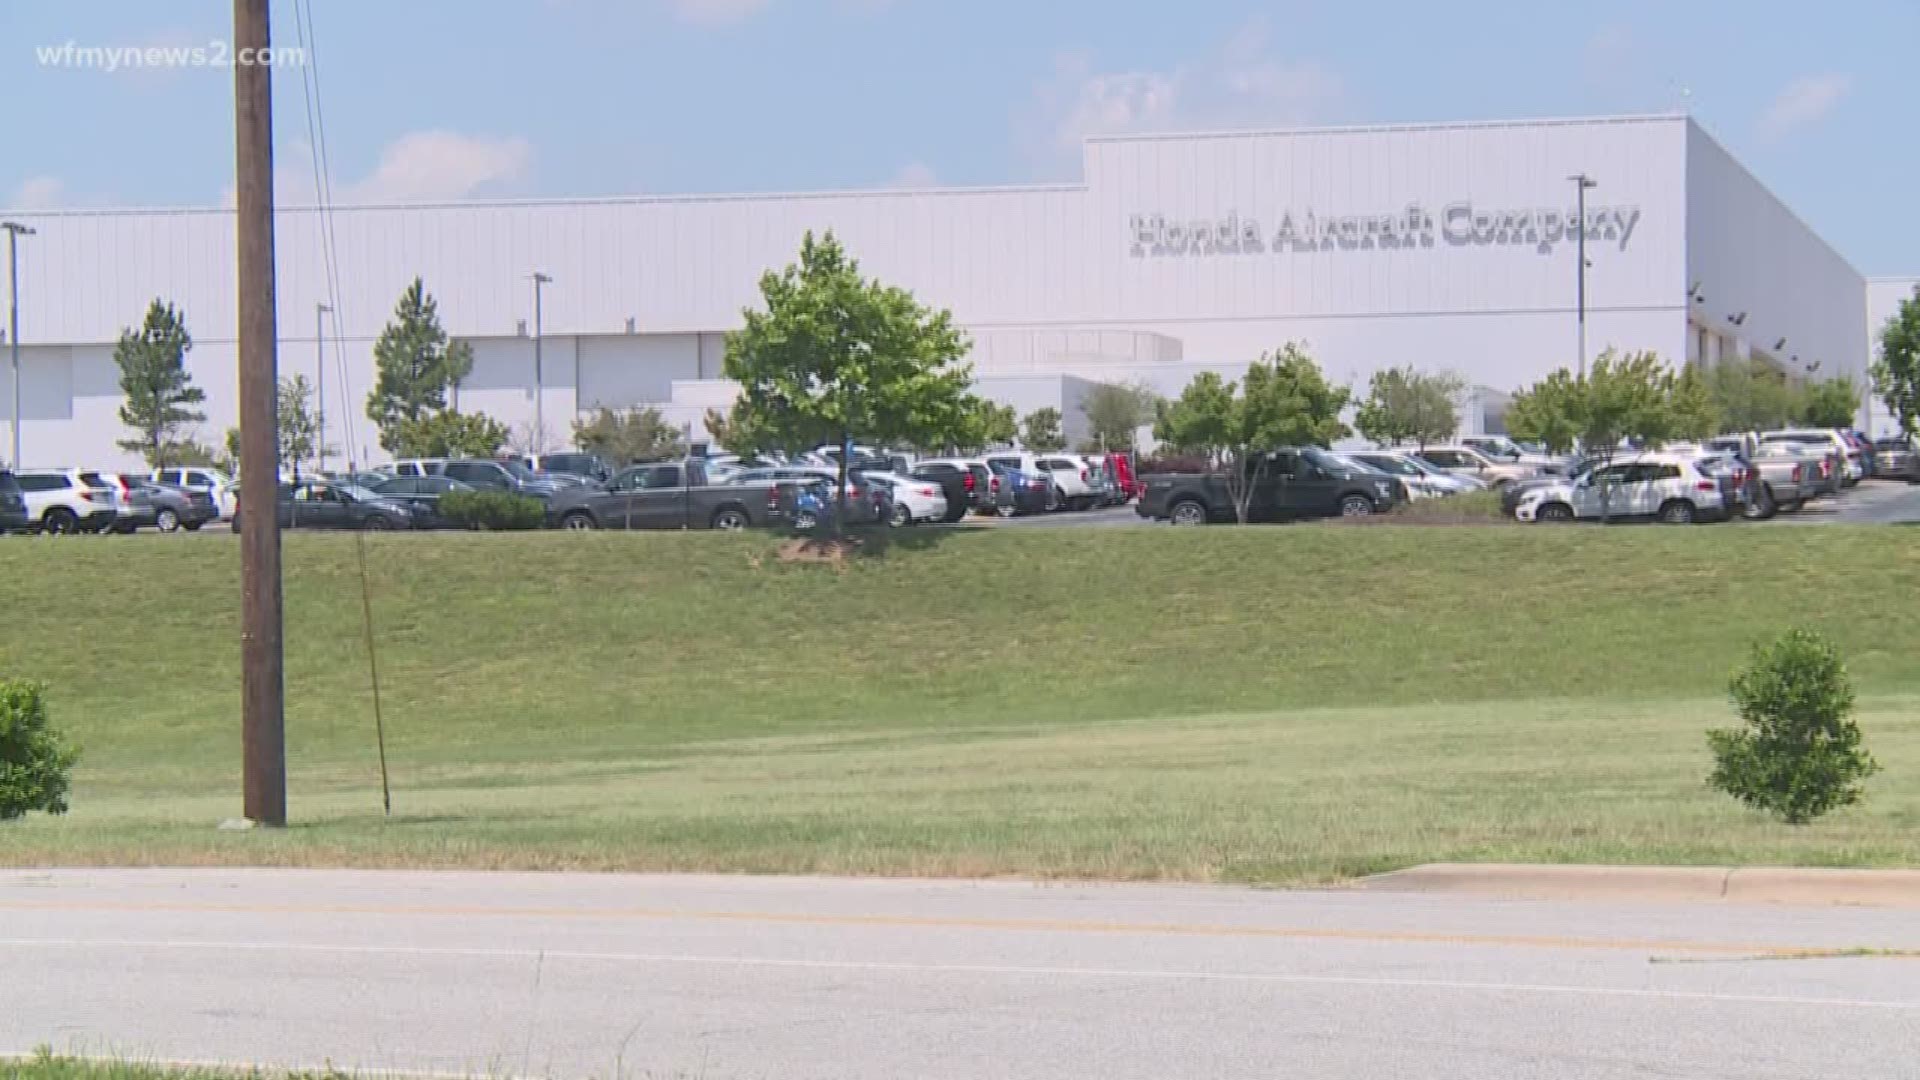 Guilford county has seen a boom is developments and the latest expansion is for HondaJet. Honda Aircraft will break ground on an 82,000-square foot, $15.5 million-dollar facility they hope is completed by July 2020.